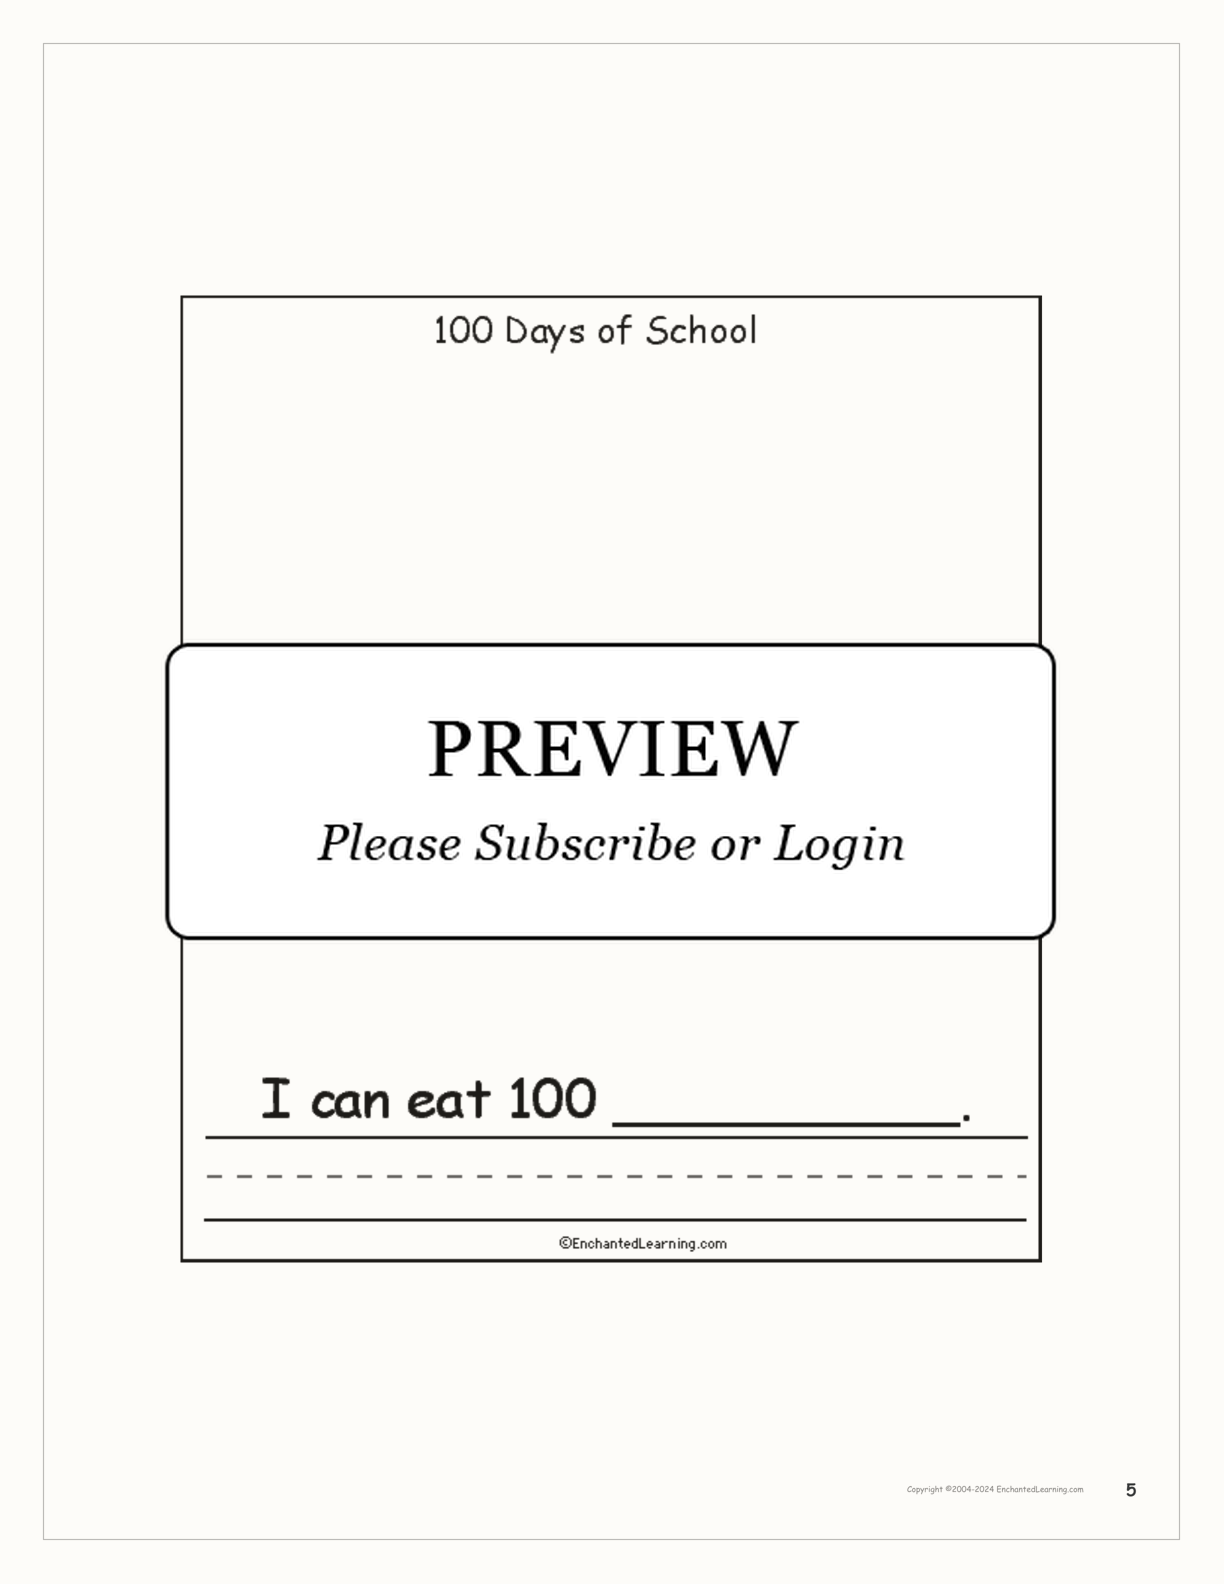 100 Days of School interactive worksheet page 5